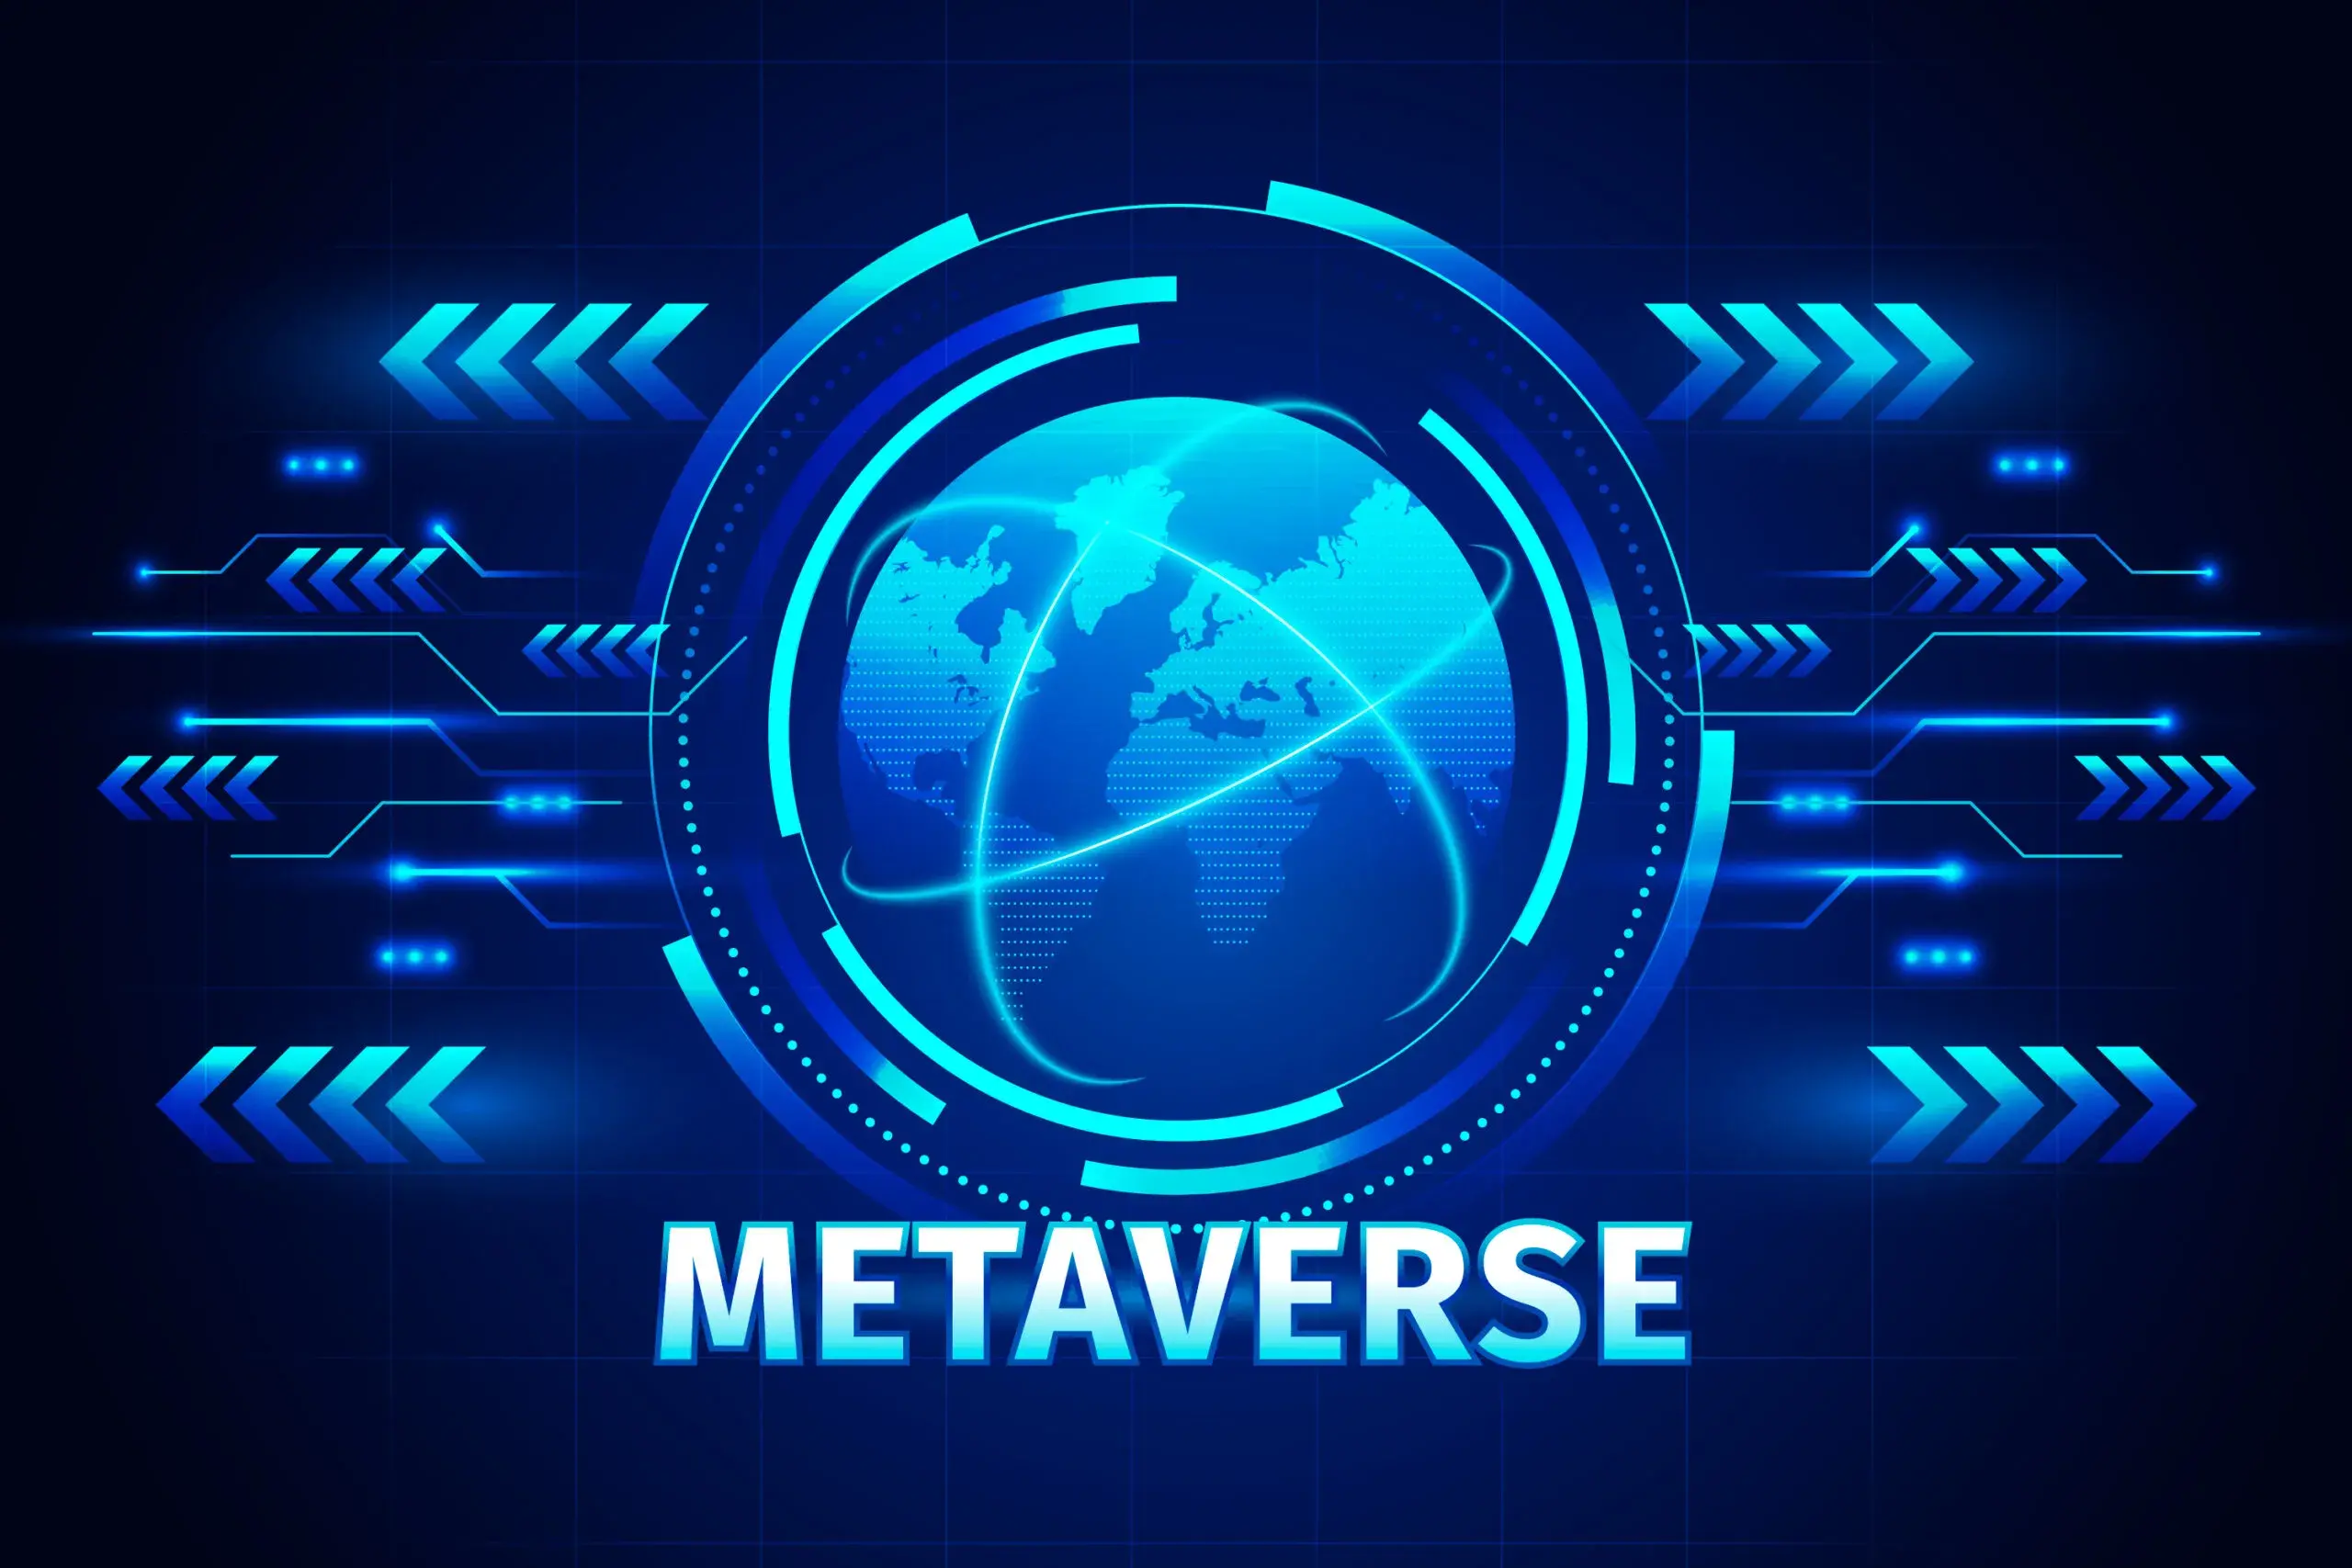 Well-versed with Metaverse